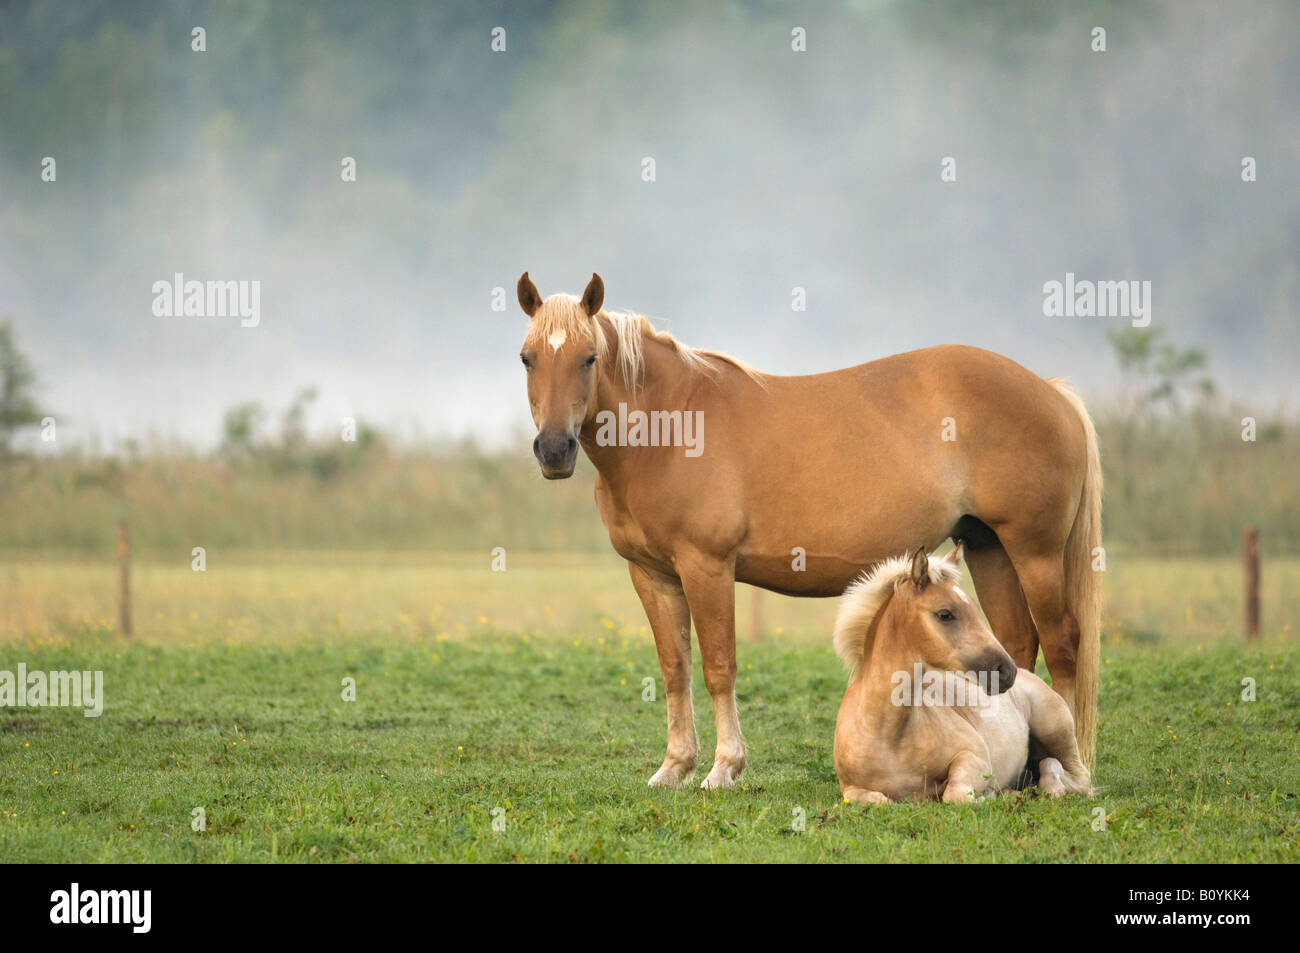 Haflinger horse and foal standing in pasture Stock Photo